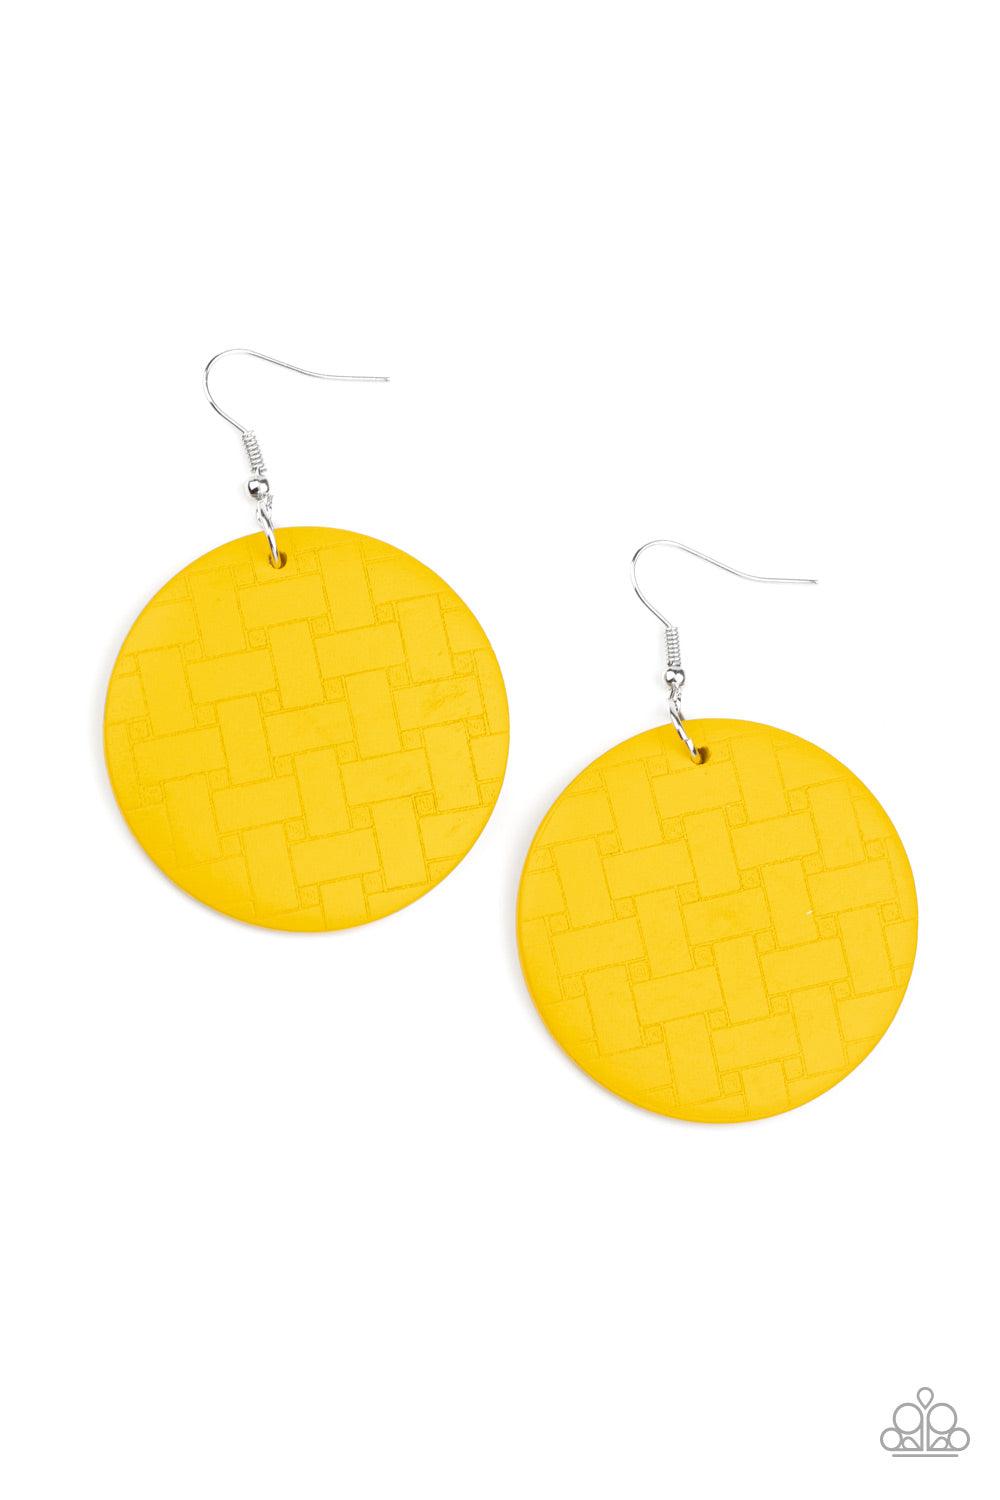 Paparazzi Accessories Natural Novelty - Yellow Engraved in a woven geometric pattern, an earthy yellow wooden disc swings from the ear for a natural-inspired look. Earring attaches to a standard fishhook fitting. Sold as one pair of earrings. Jewelry